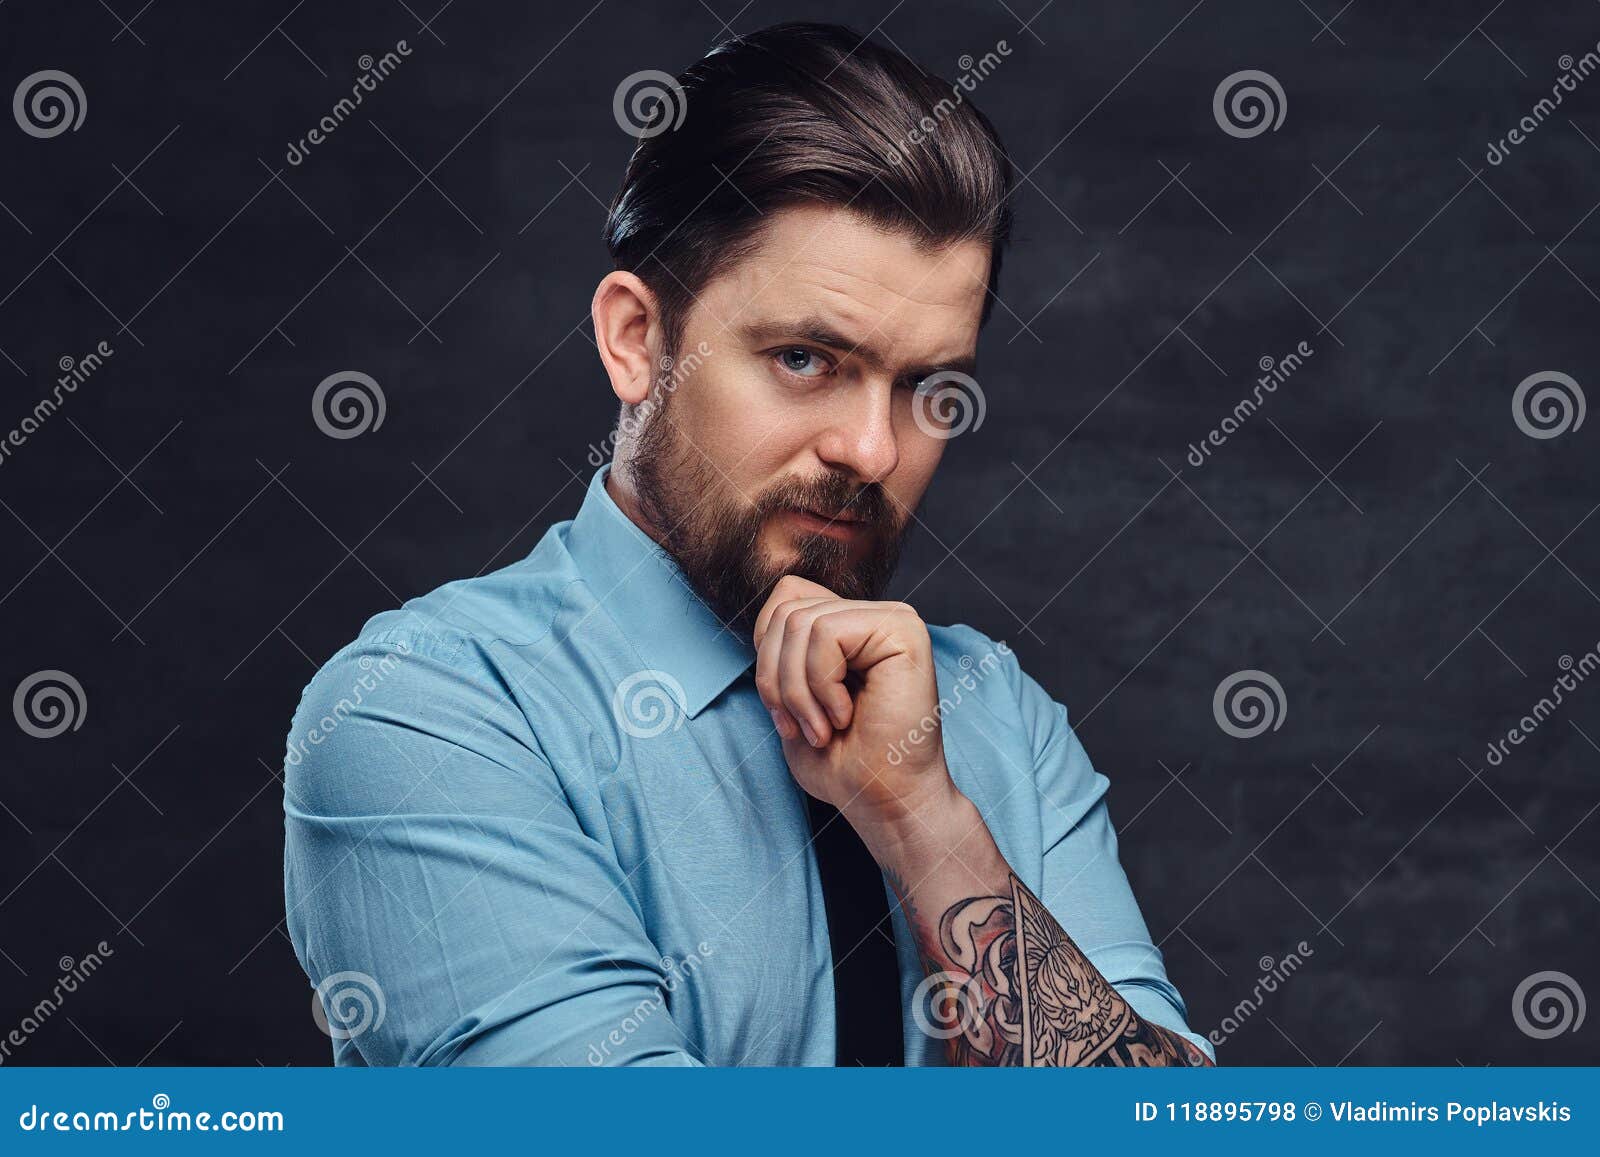 Portrait Of A Tattooed Handsome Middle-aged Man With Beard And Hairstyle Dressed In A Blue Shirt ...